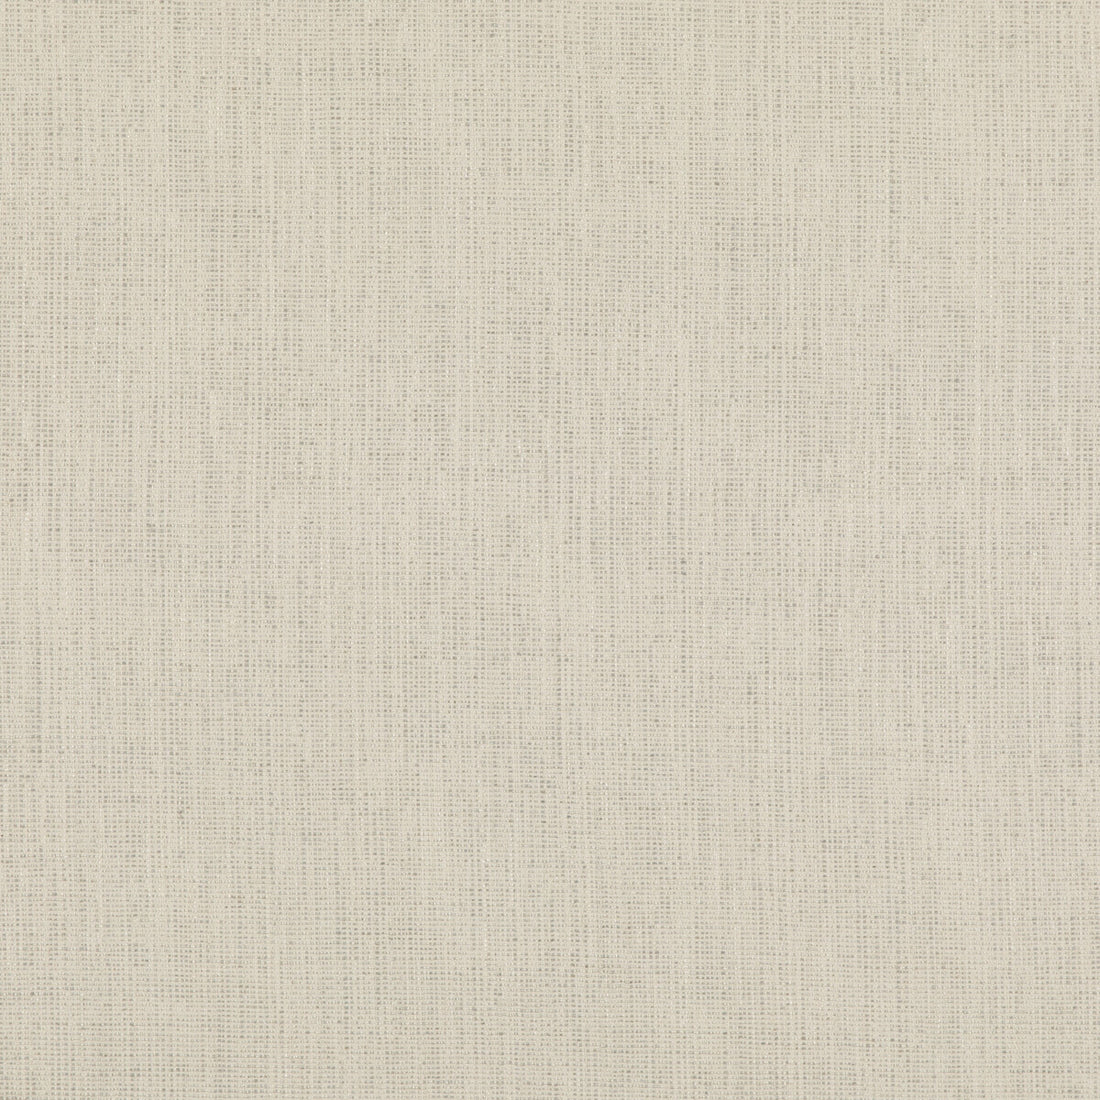 Stipple fabric in ivory color - pattern ED85317.104.0 - by Threads in the Luxury Weaves II collection